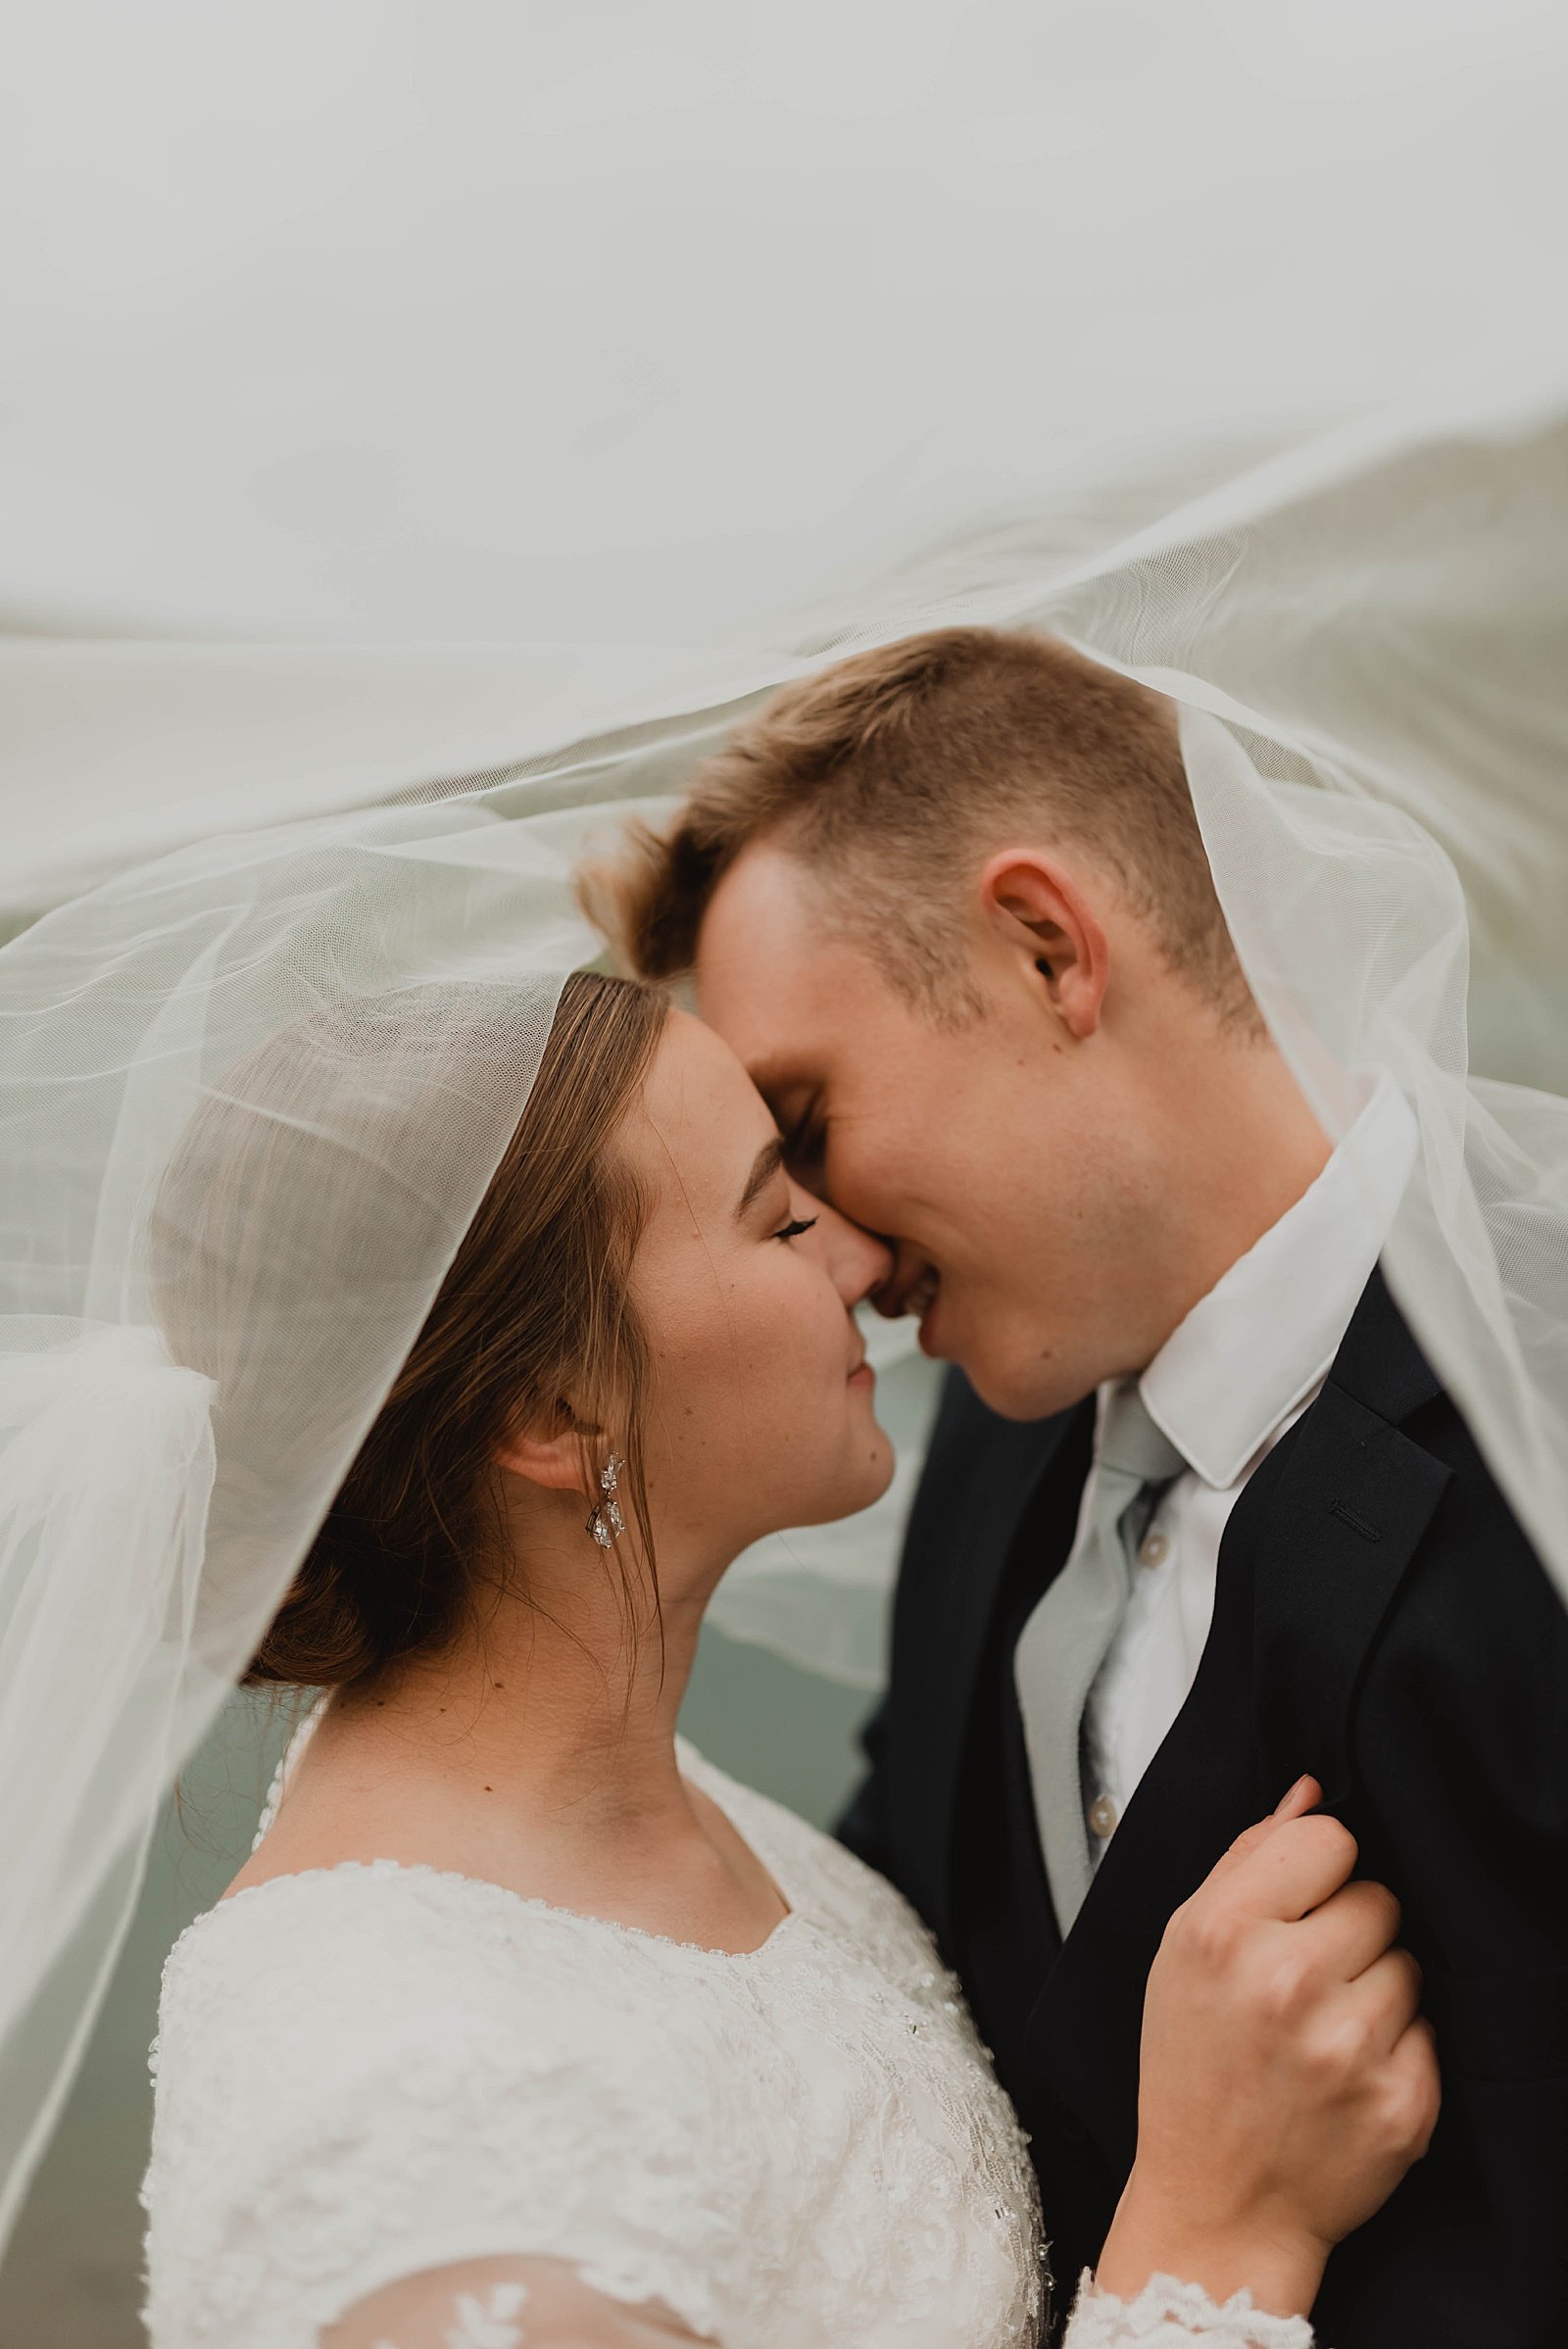  Newlyweds kissing under a veil for a couples adventure session  